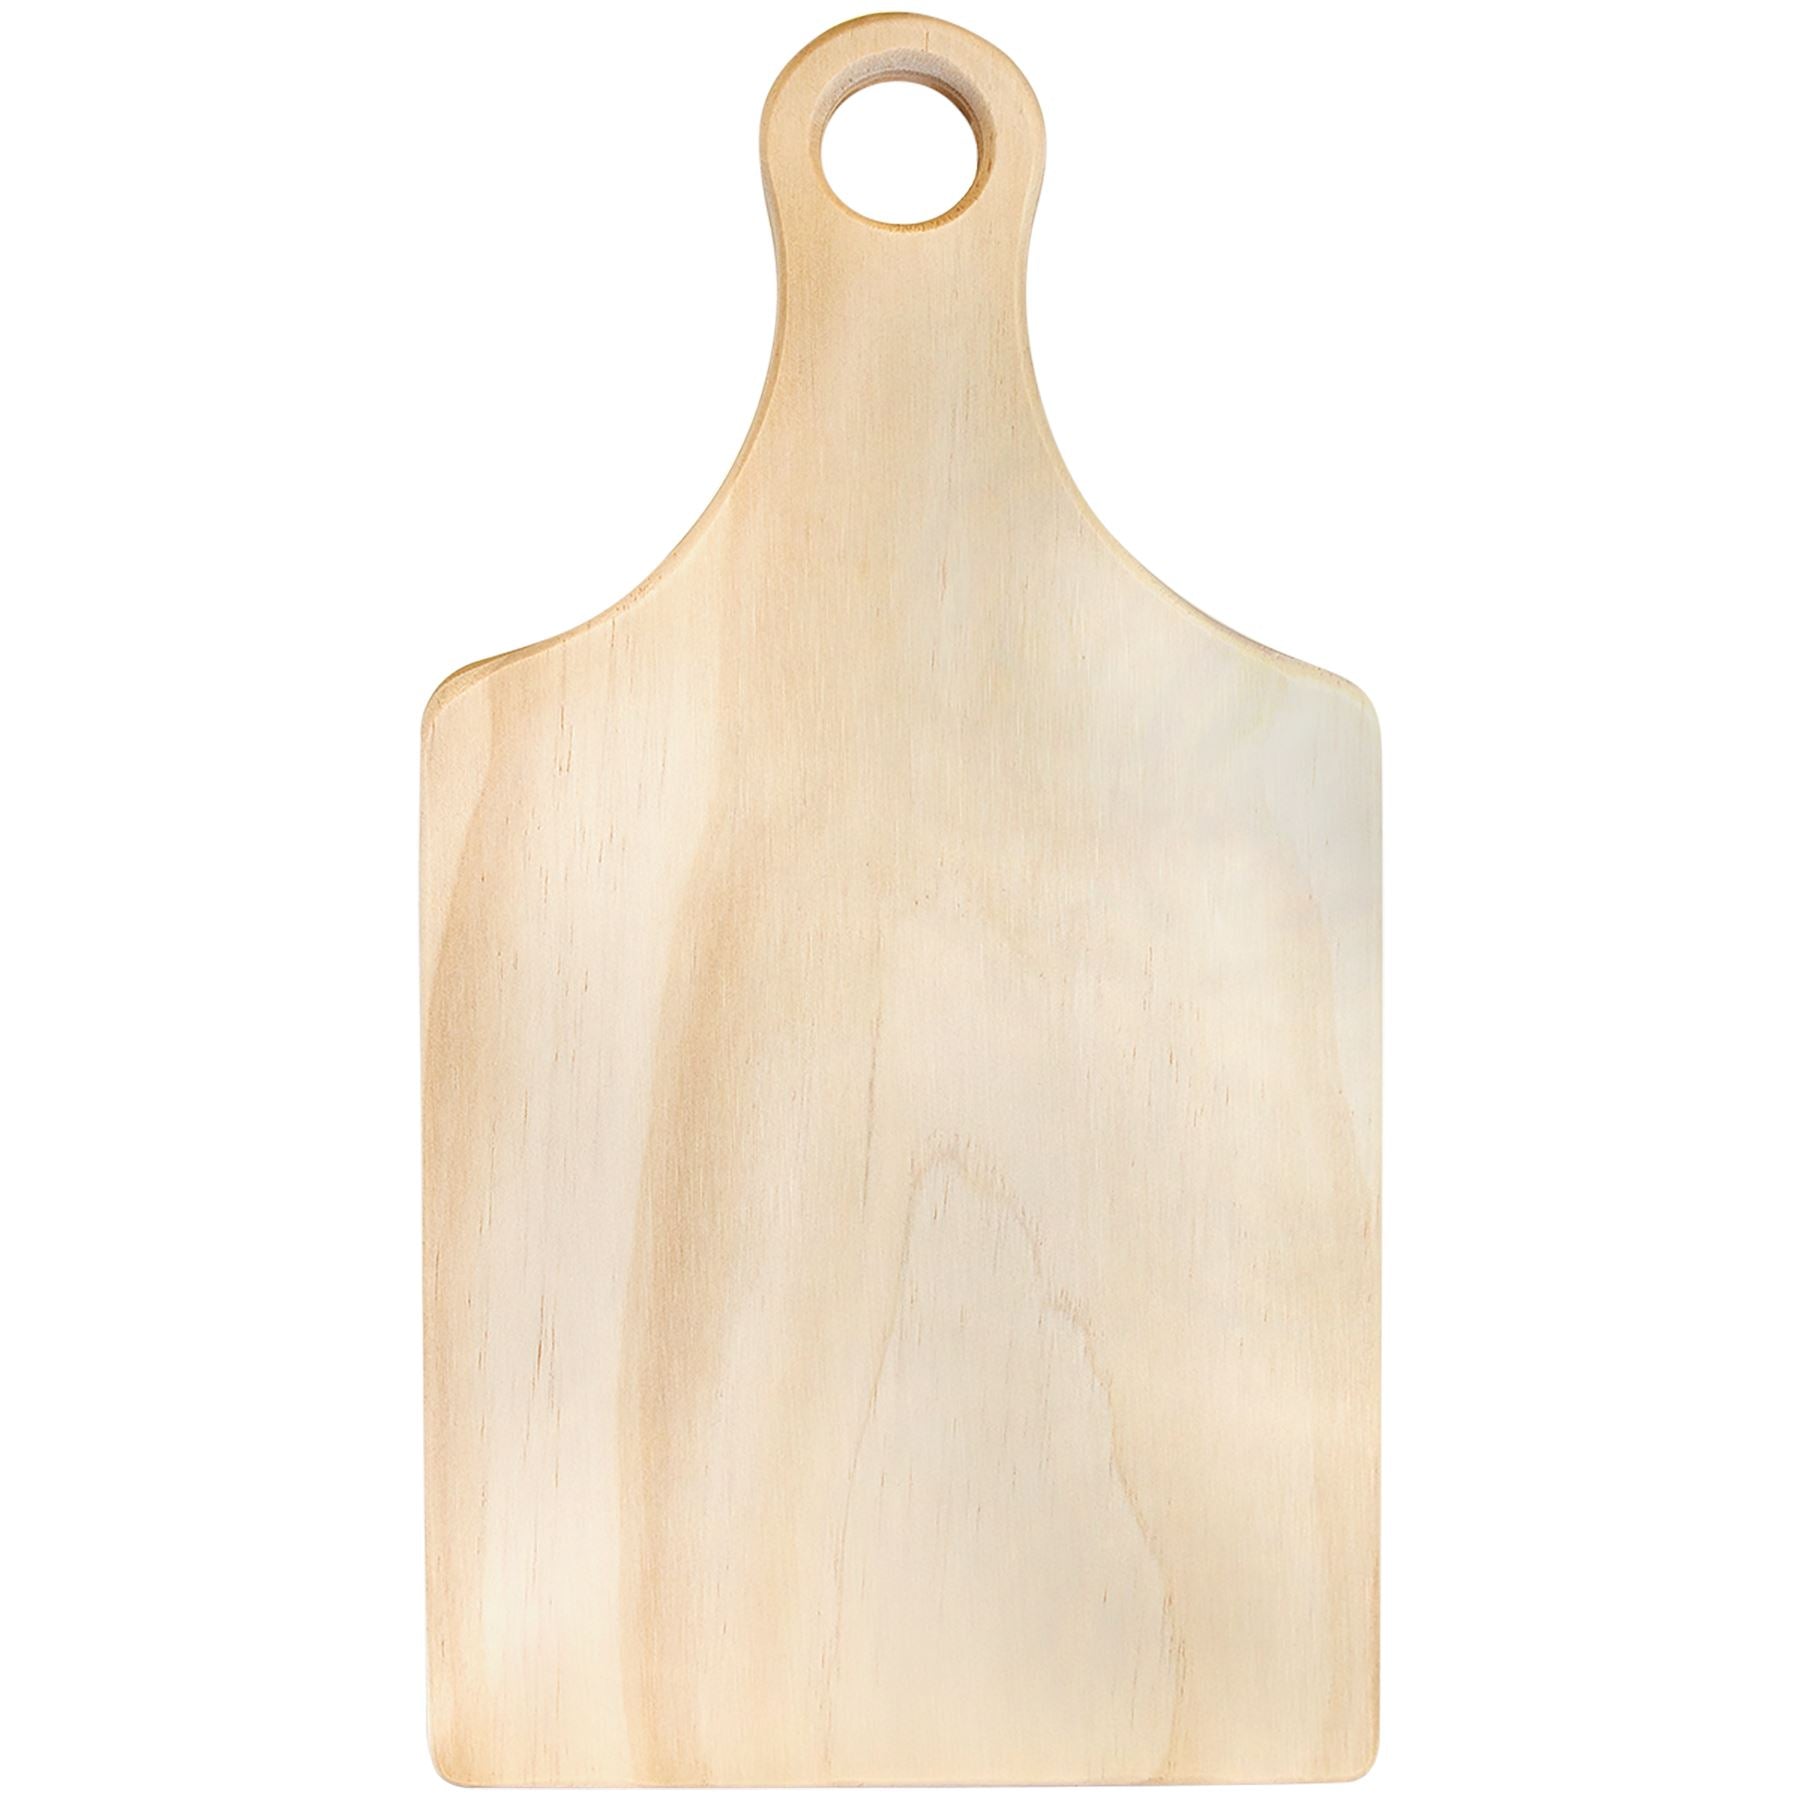 Full Color Paddle Shaped Wood Cutting Board 13 1/2" x 7", Full Color Sub Dye/Laser Engraved Cutting Board Craftworks NW 